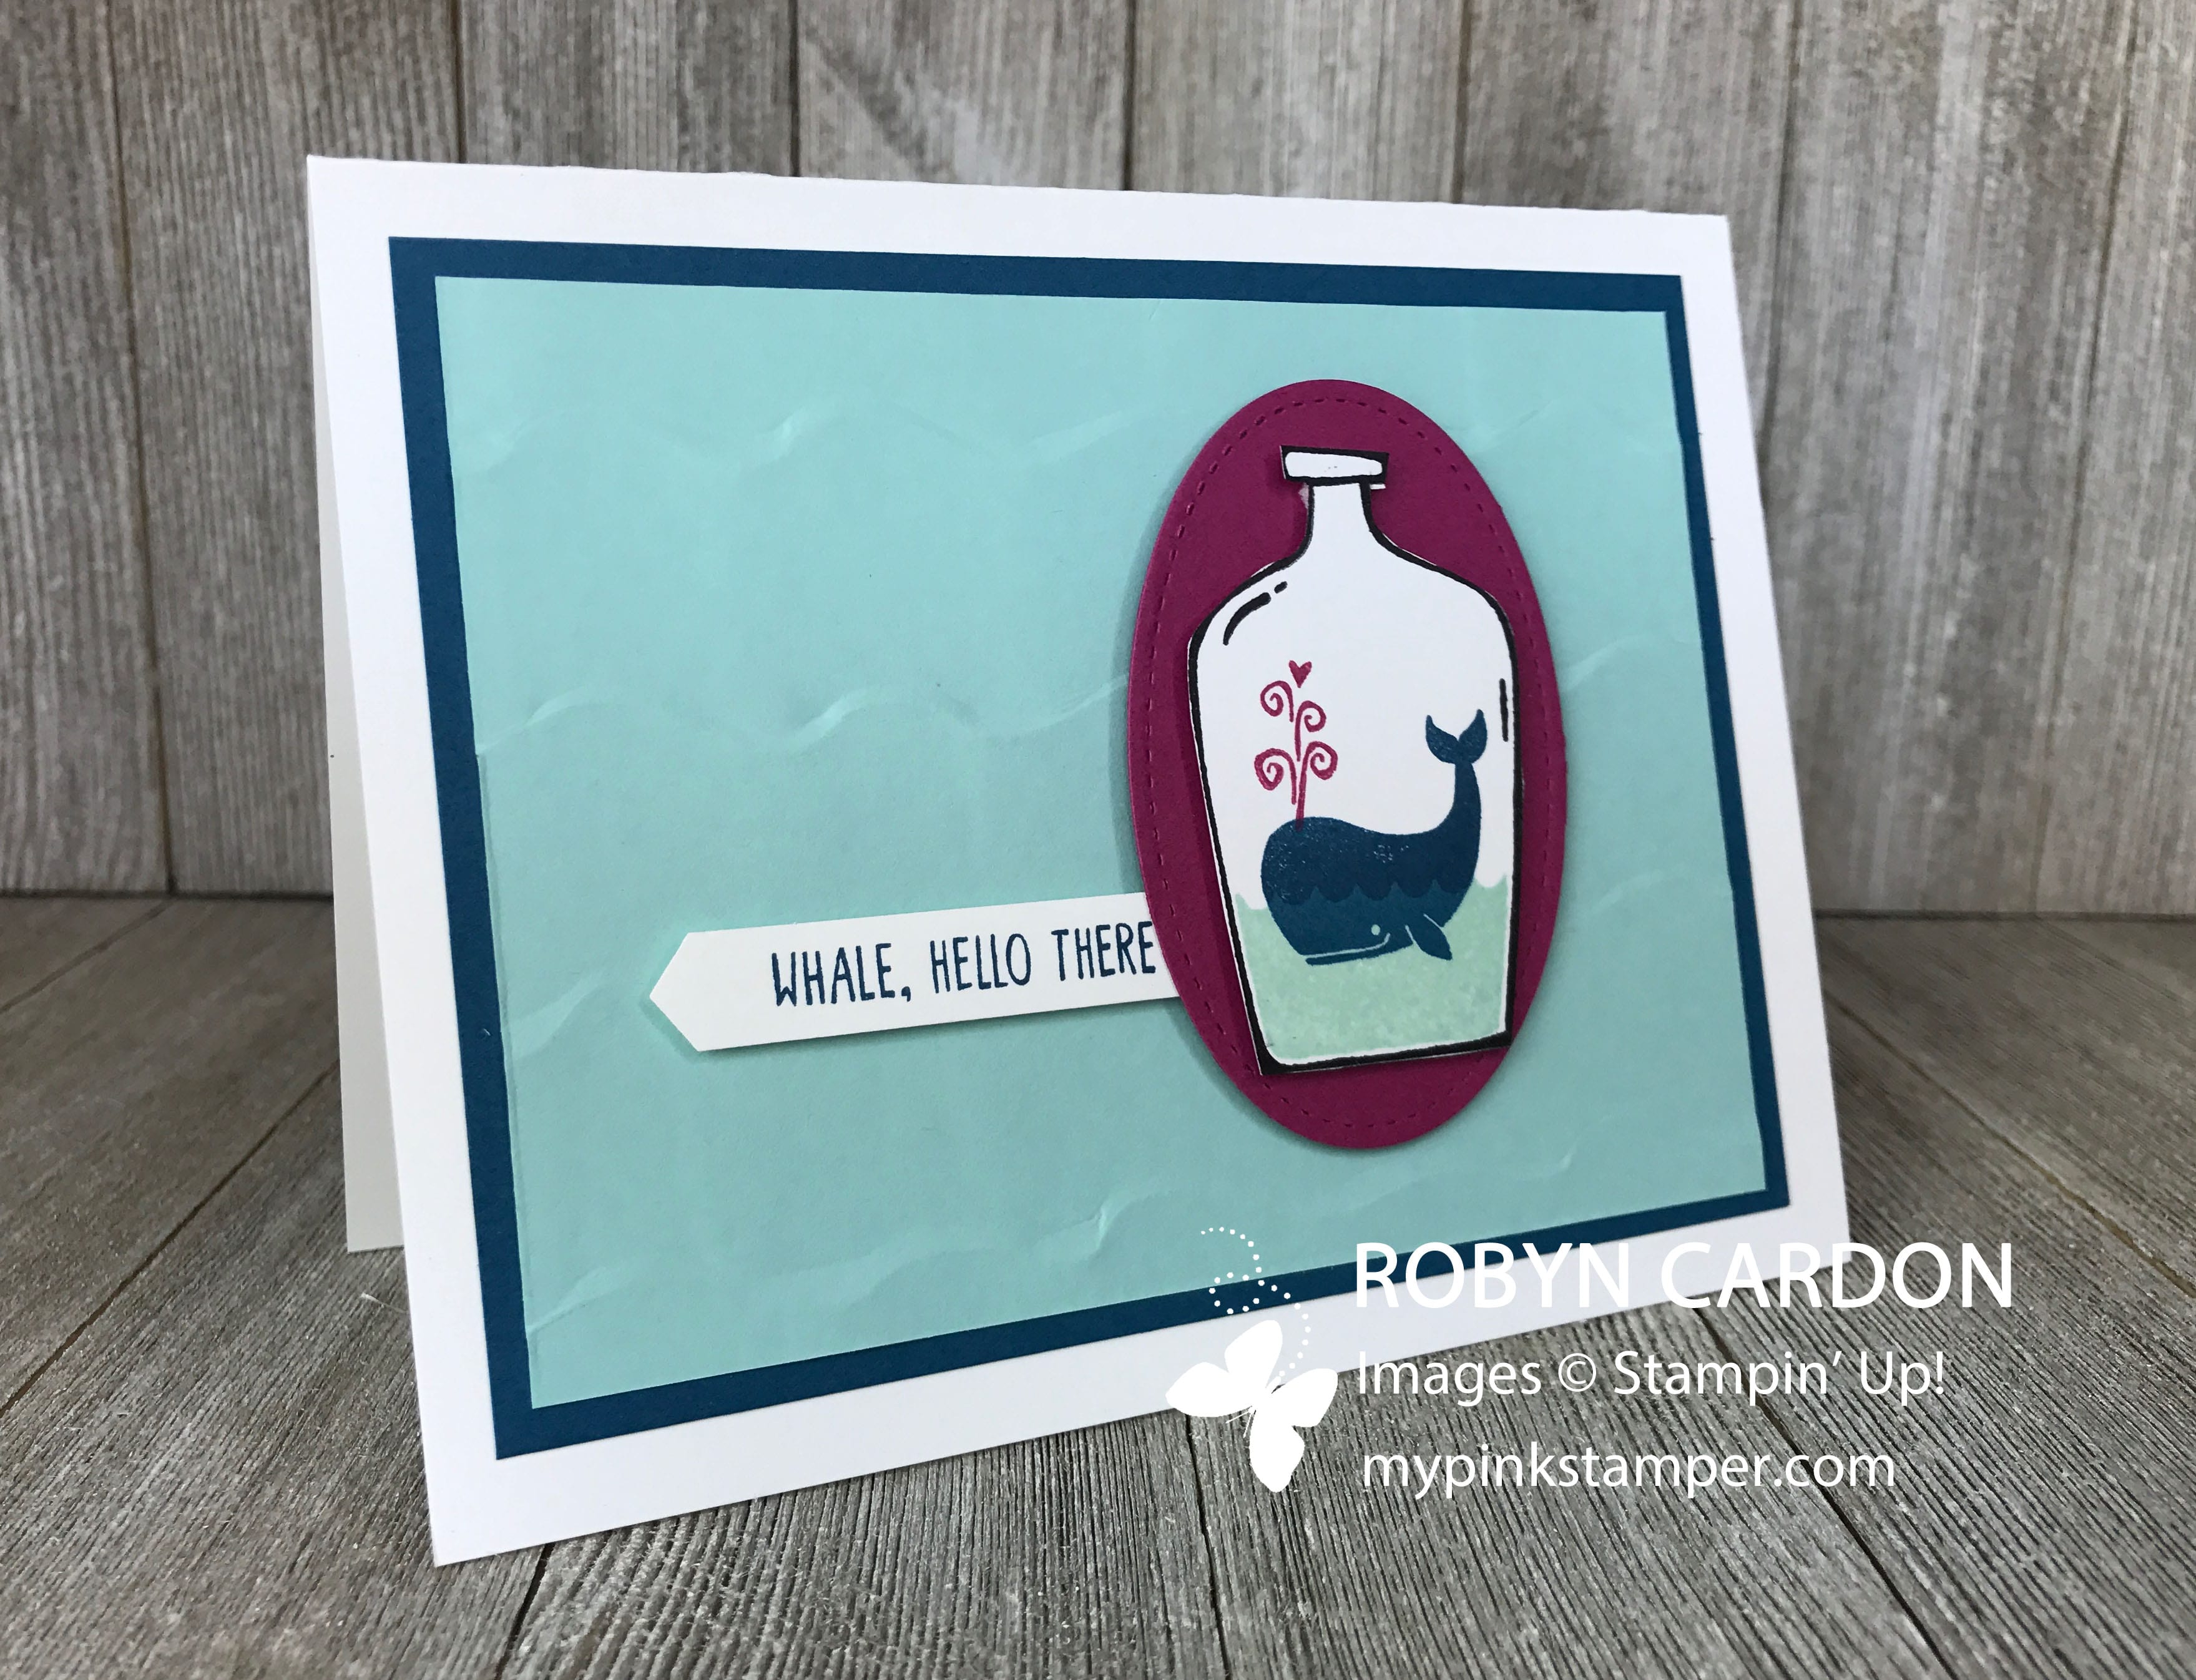 Stampin’ Up! Message in a Bottle Video Tutorial! – Episode 588